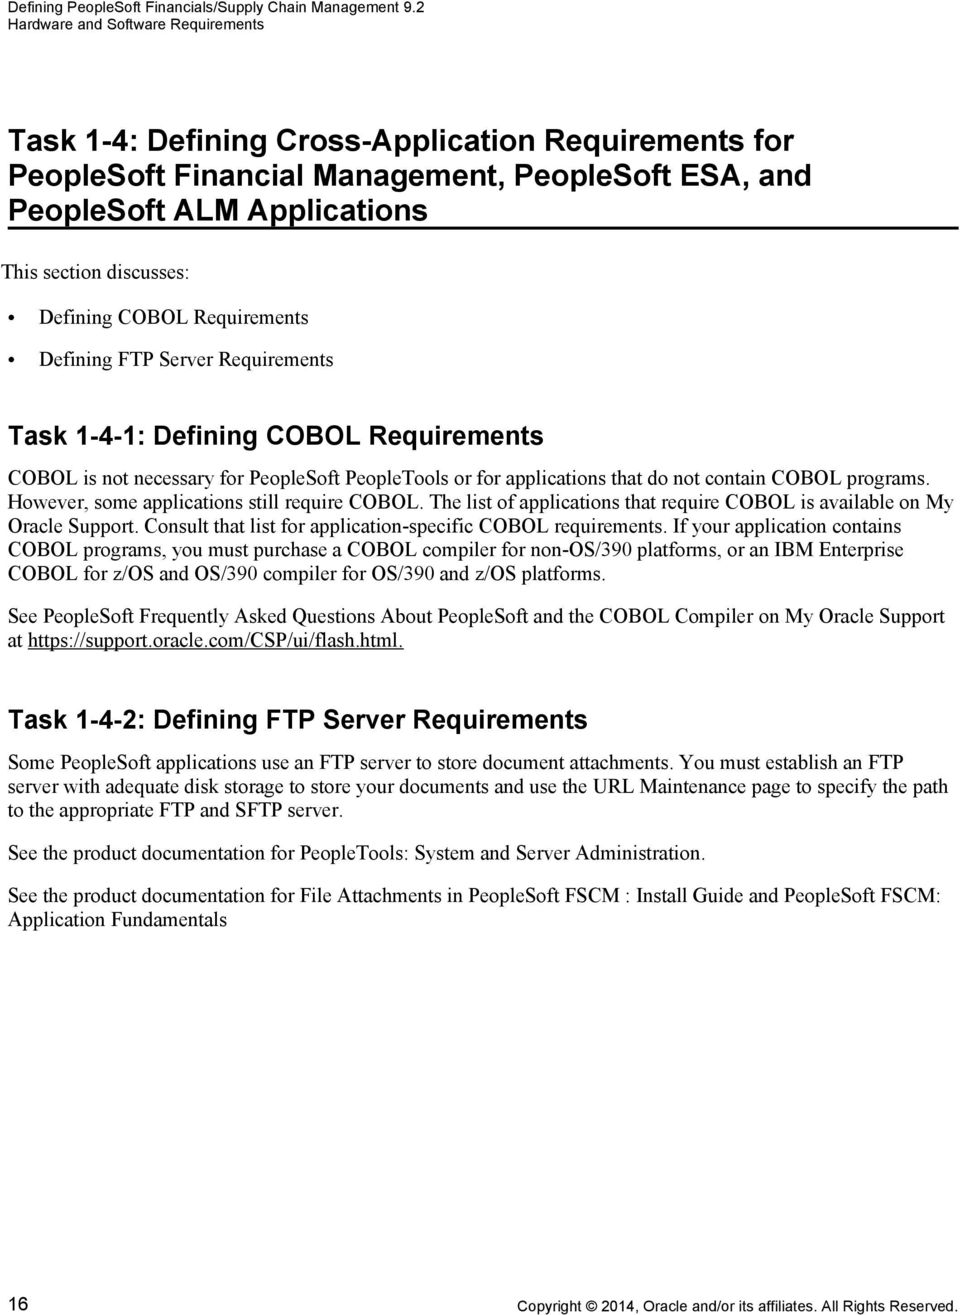 FTP Server Requirements Task 1-4-1: Defining COBOL Requirements COBOL is not necessary for PeopleSoft PeopleTools or for applications that do not contain COBOL programs.